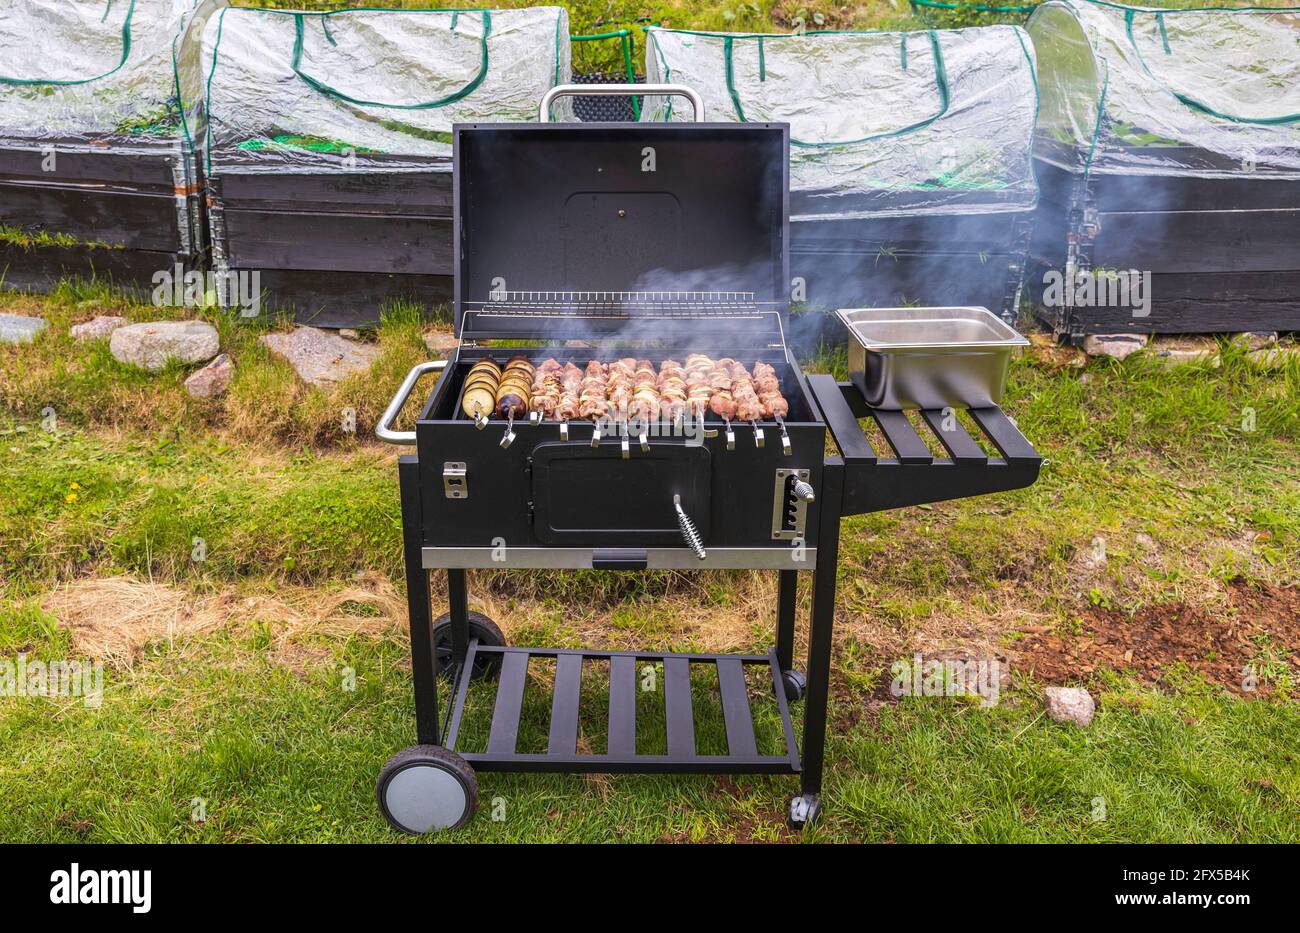 View of barbecue on grill on backyard of private house. Sweden Stock Photo  - Alamy